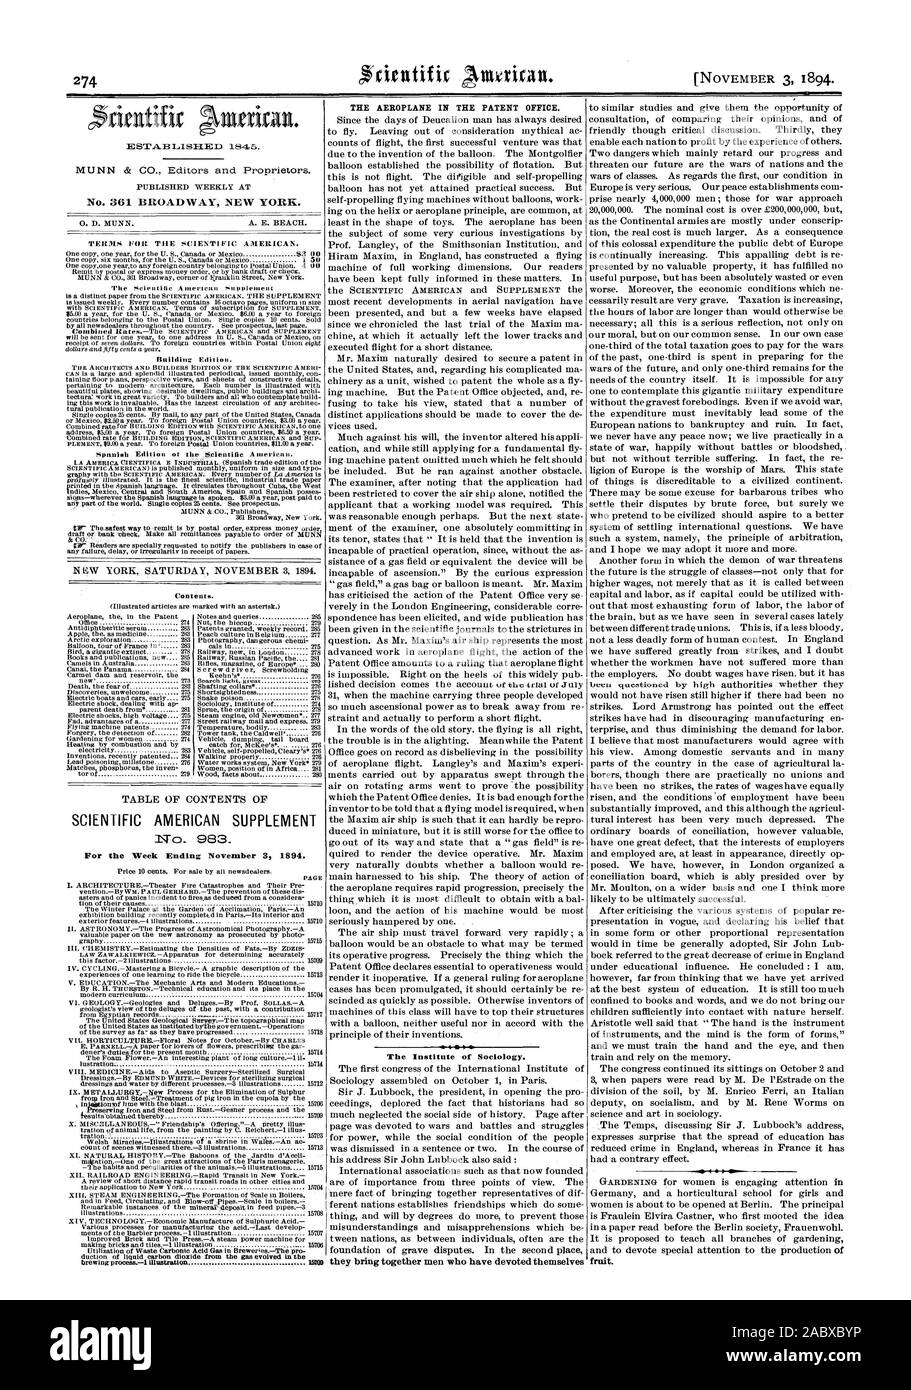 No. 361 BROADWAY NEW YORK. SCIENTIFIC AMERICAN SUPPLEMENT No. 983. For the Week Ending November 3 1894. THE AEROPLANE IN THE PATENT OFFICE. 'Sr I  The Institute of Sociology. they bring together men who have devoted themselves fruit. Search light great cre, 1894-11-03 Stock Photo